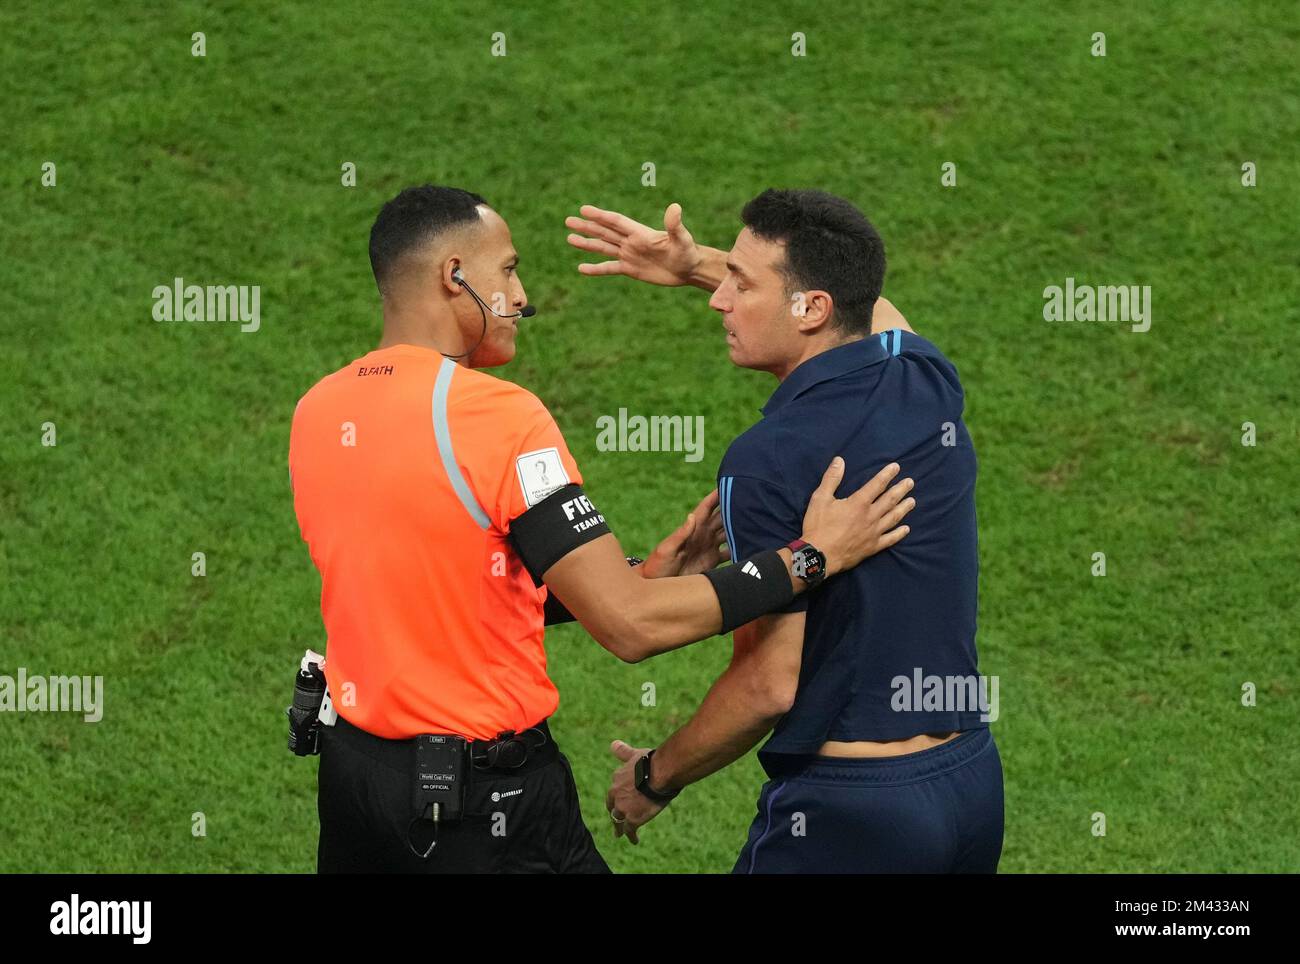 Austin's Ismail Elfath to be fourth official in FIFA World Cup final